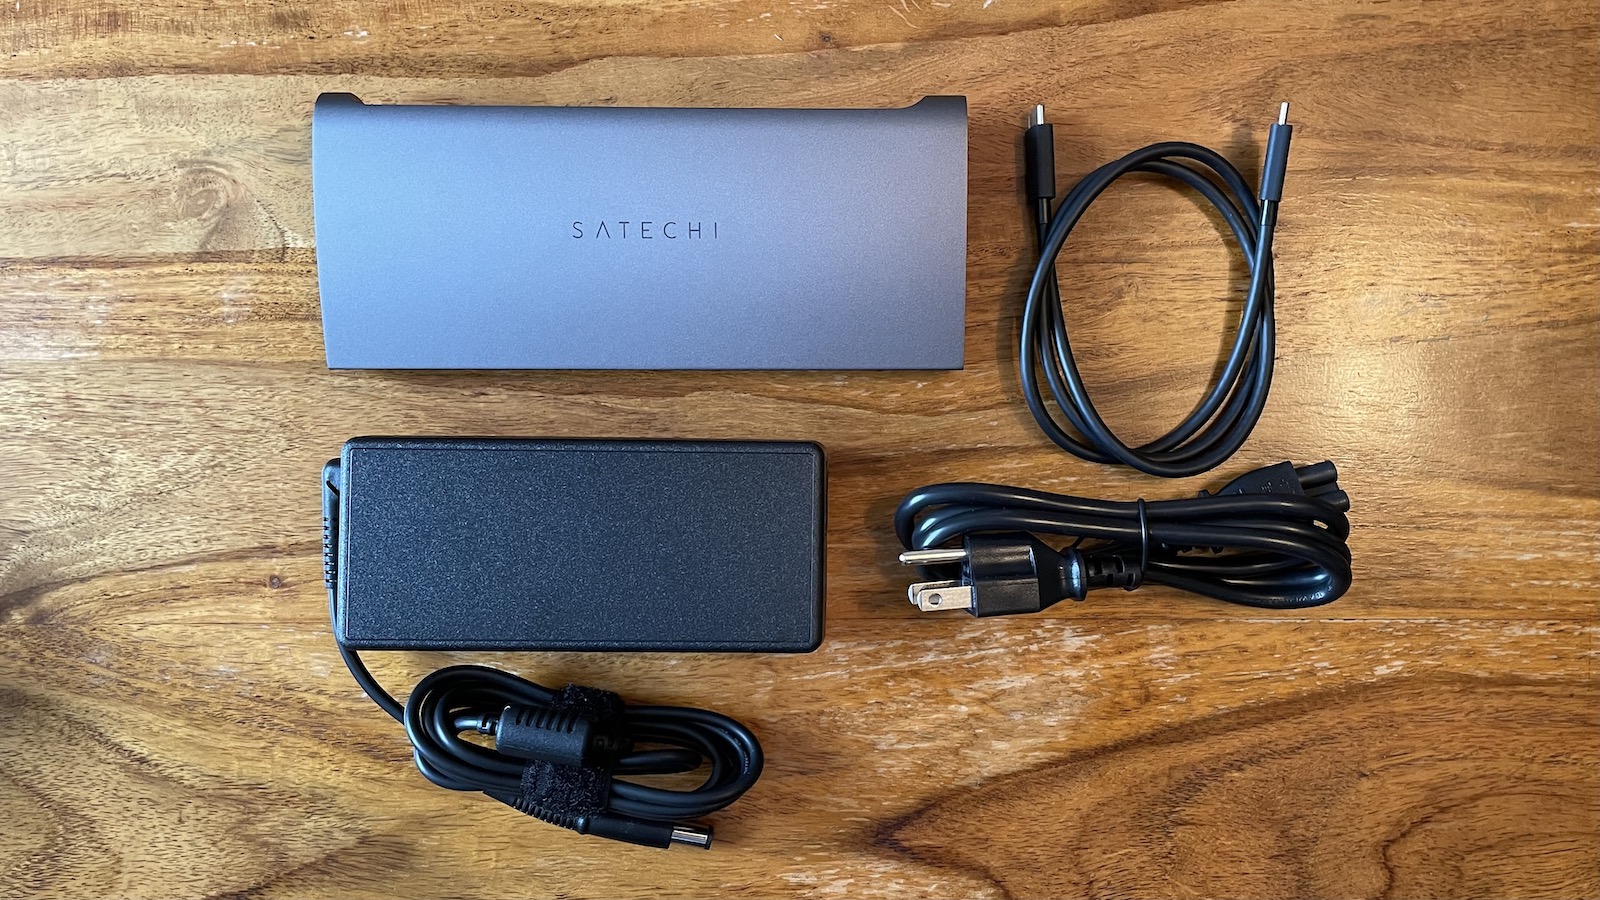 satechi thunderbolt 4 dock review contents